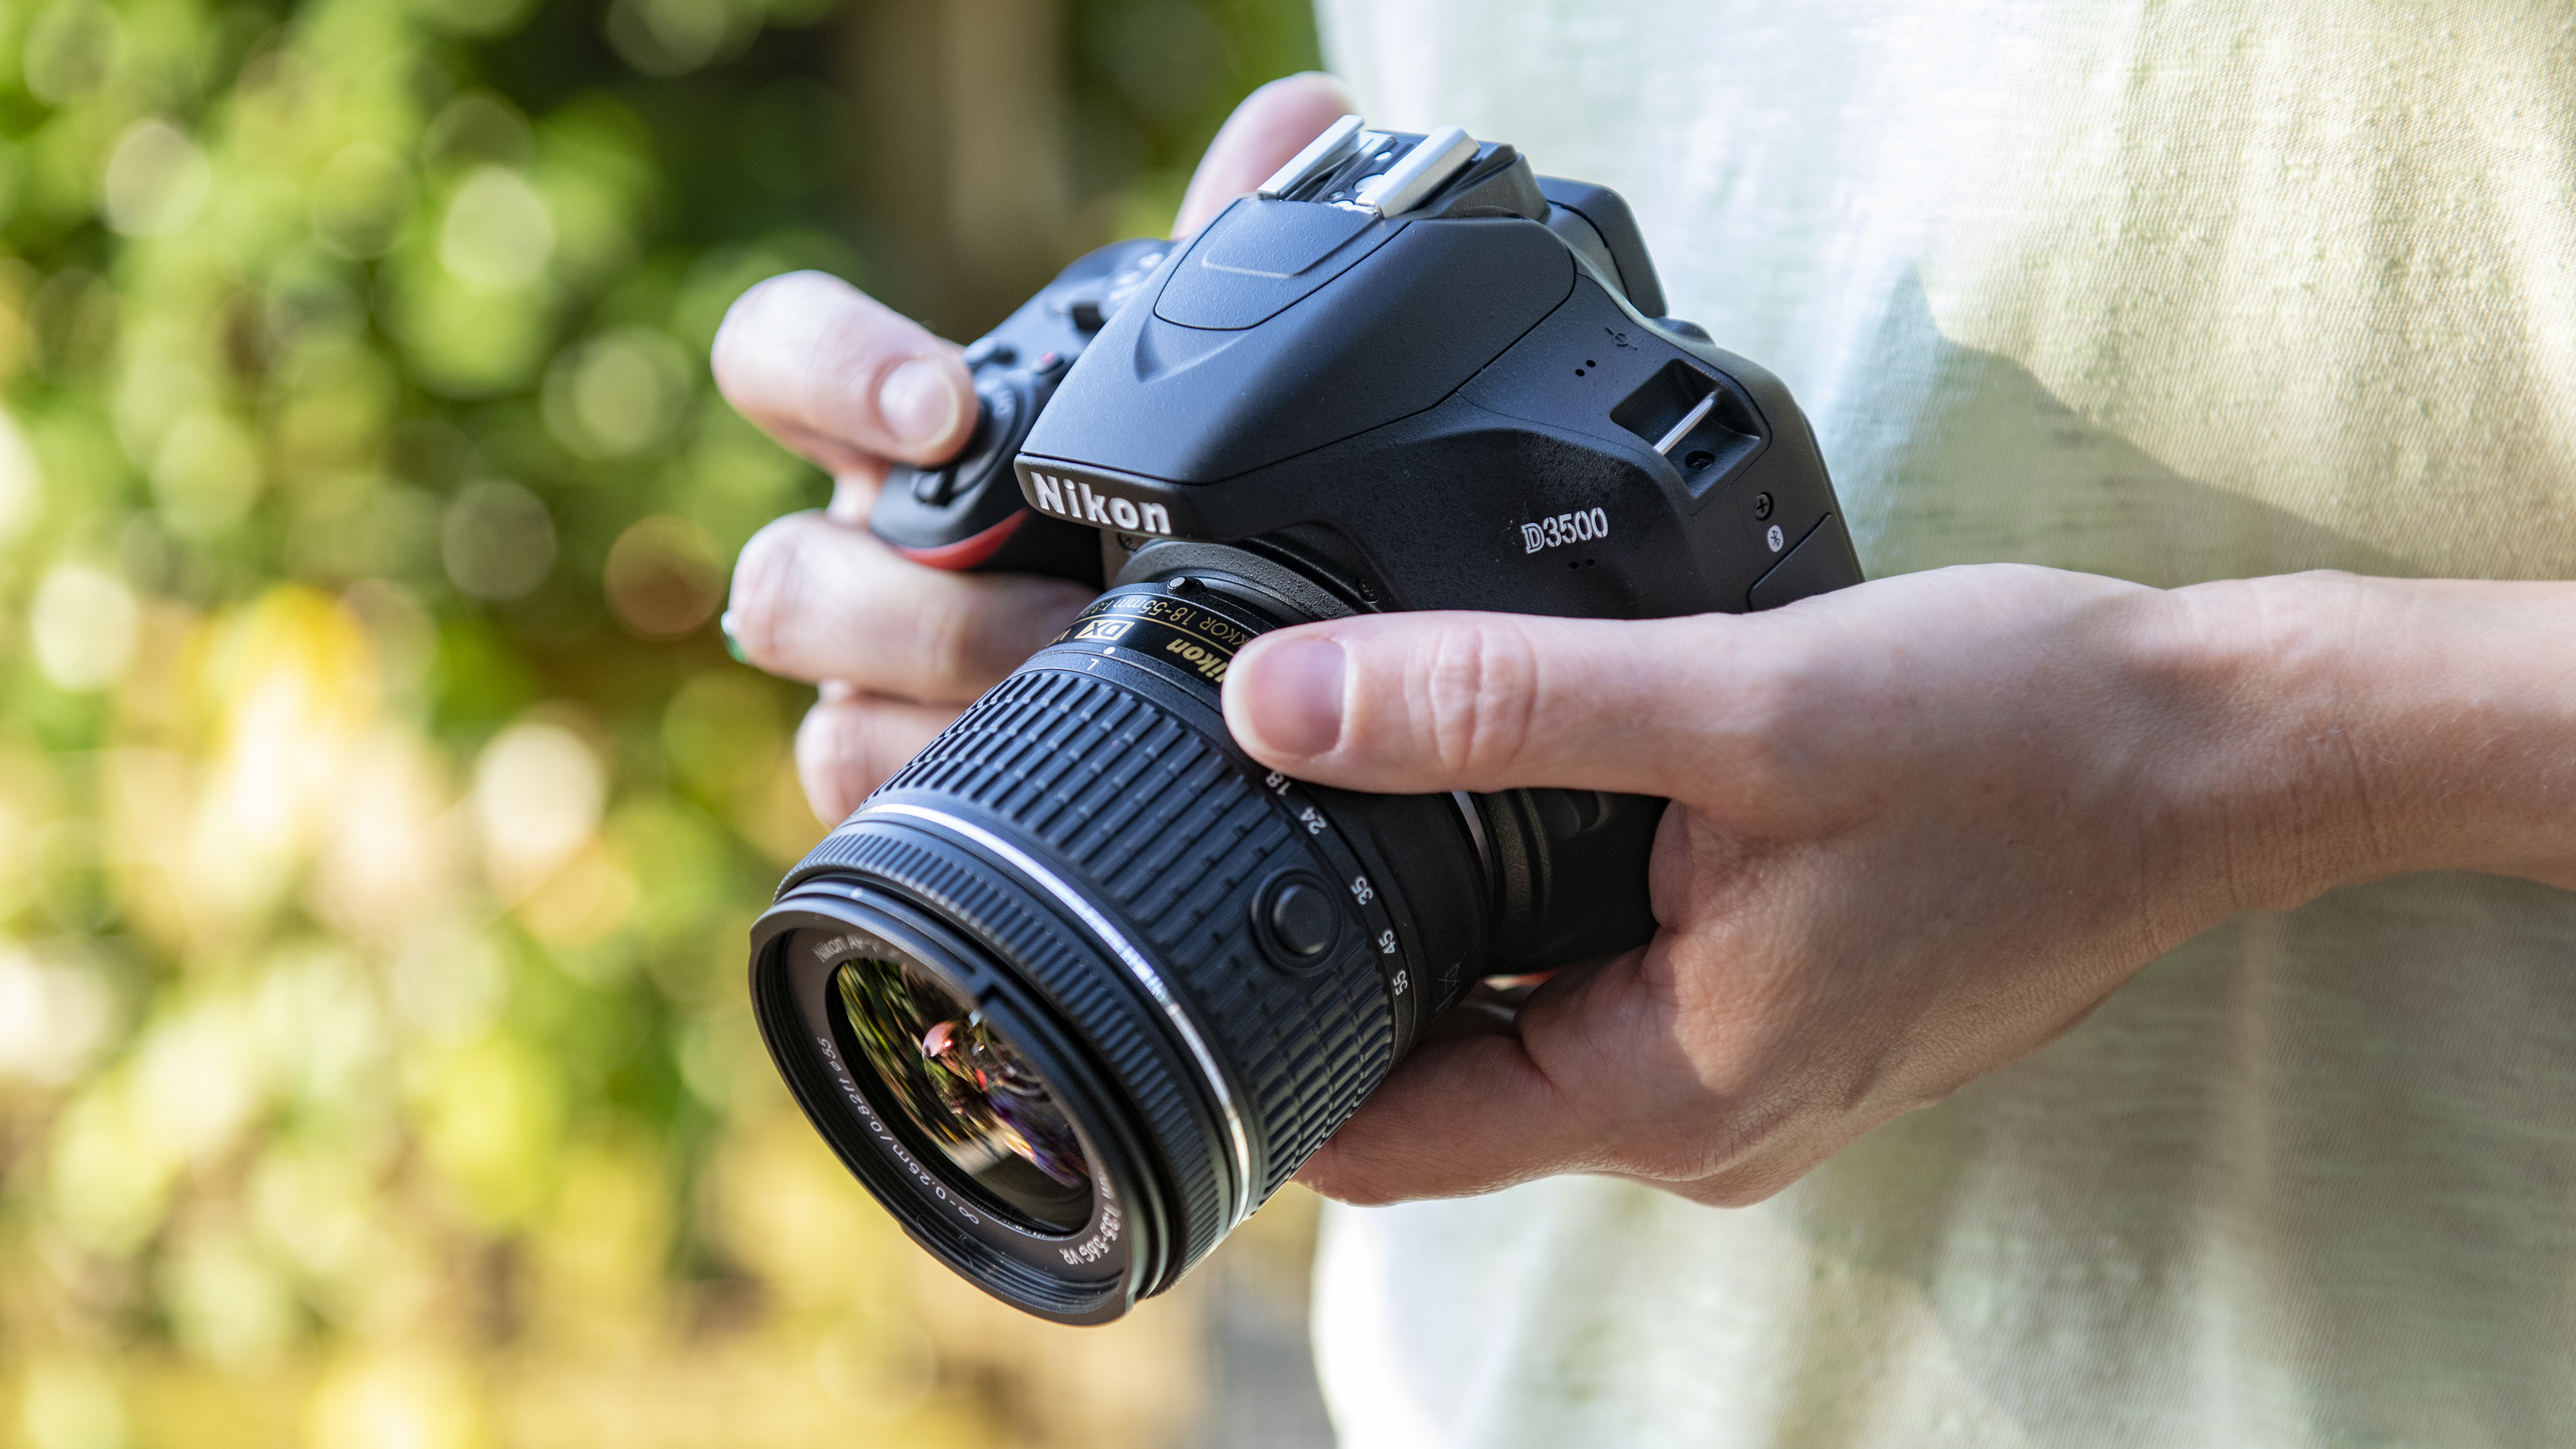 Best Nikon camera 2020: the 10 finest cameras from Nikon's line-up 9